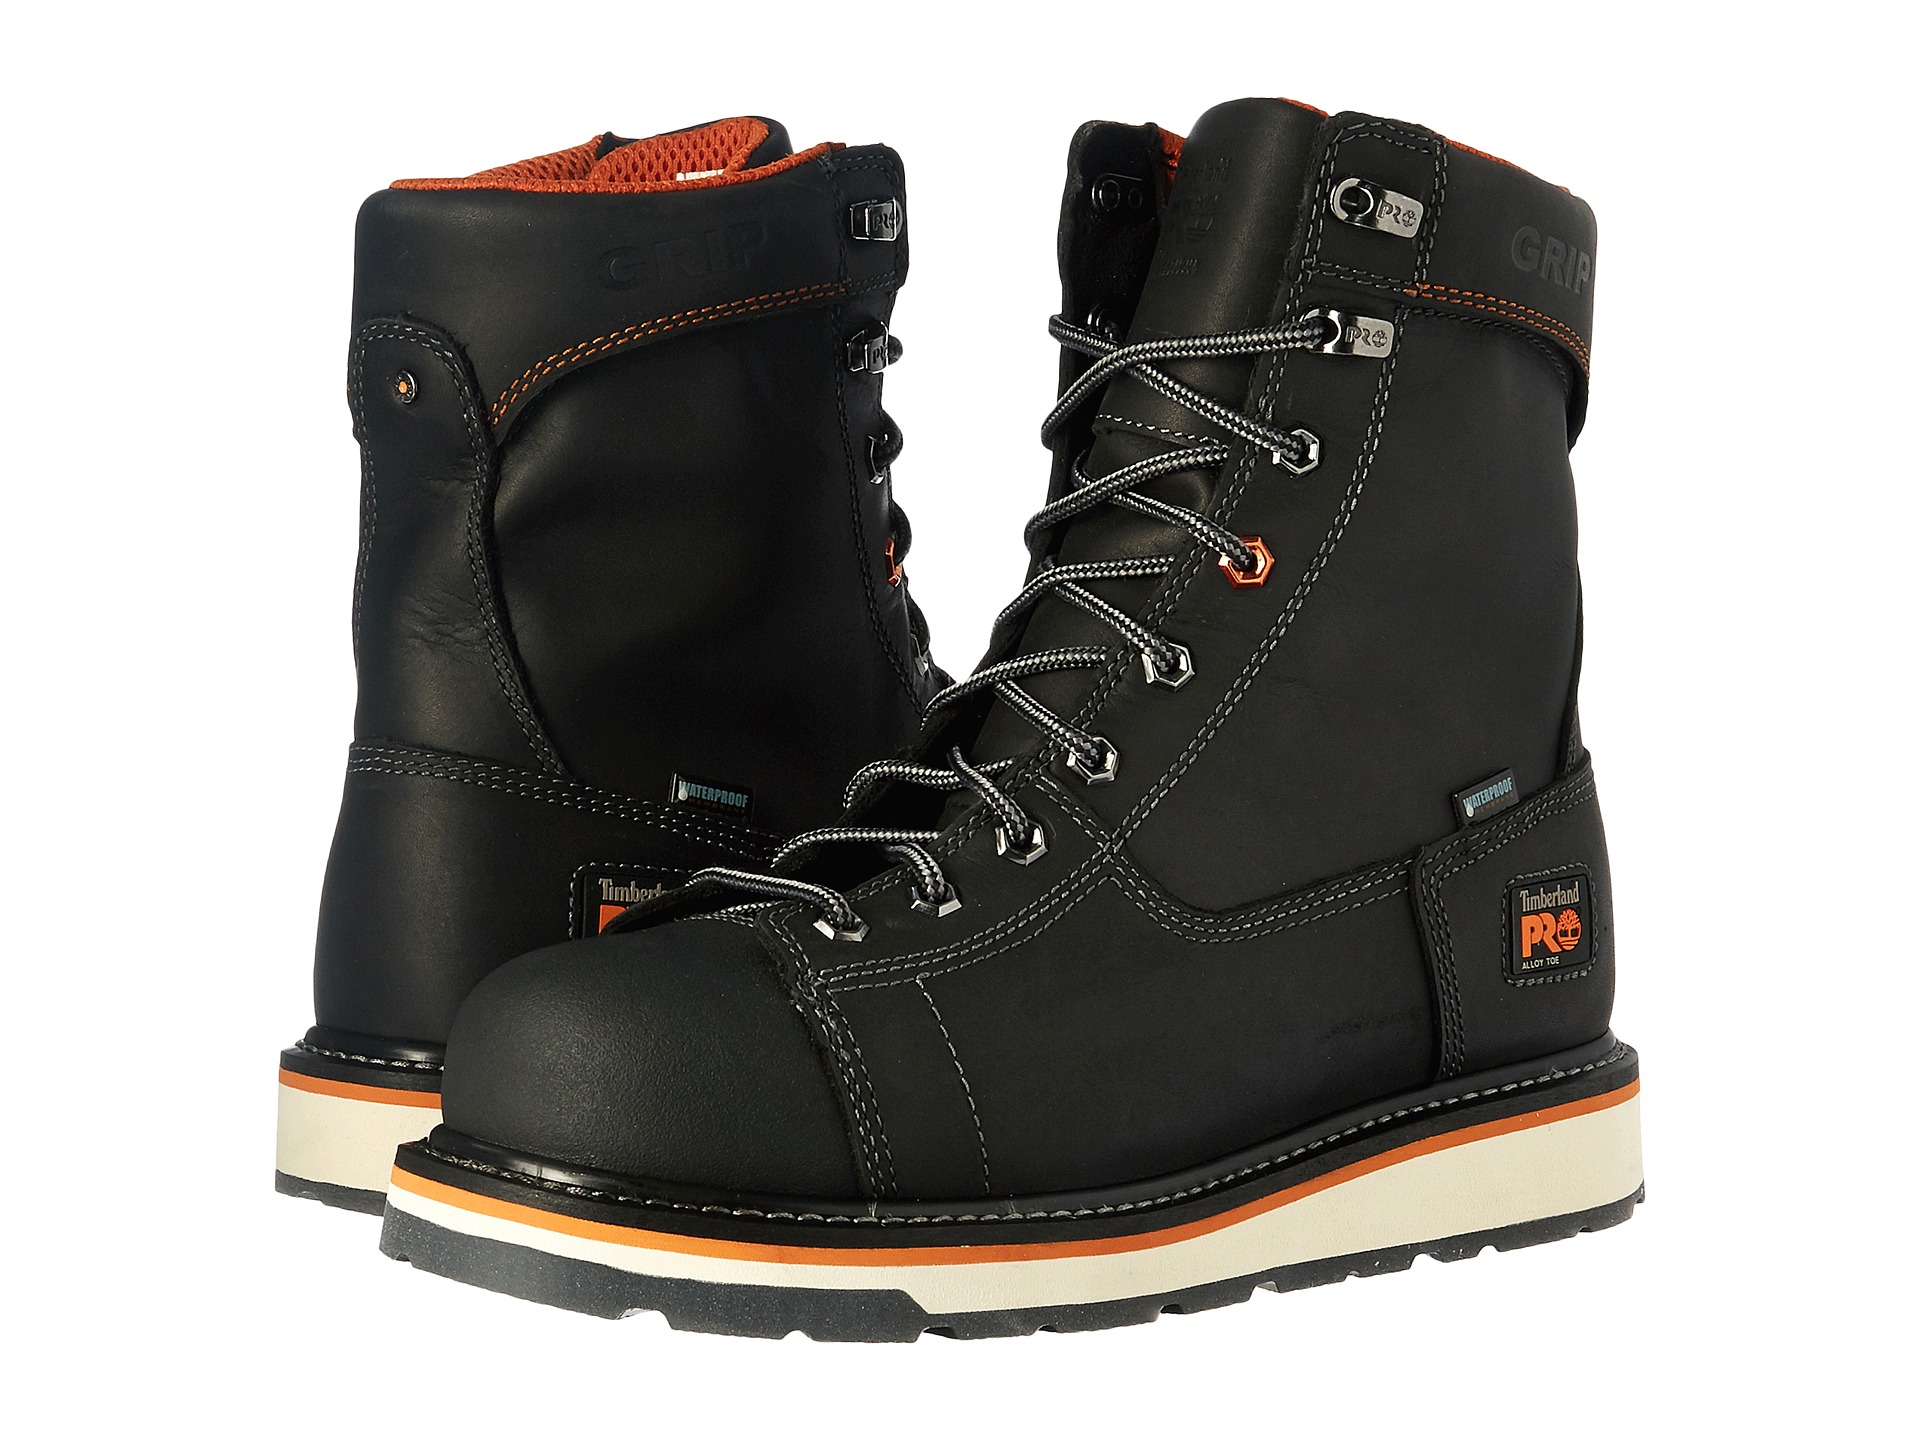 Timberland PRO Gridworks Alloy Safety Toe Waterproof Boot at Zappos.com